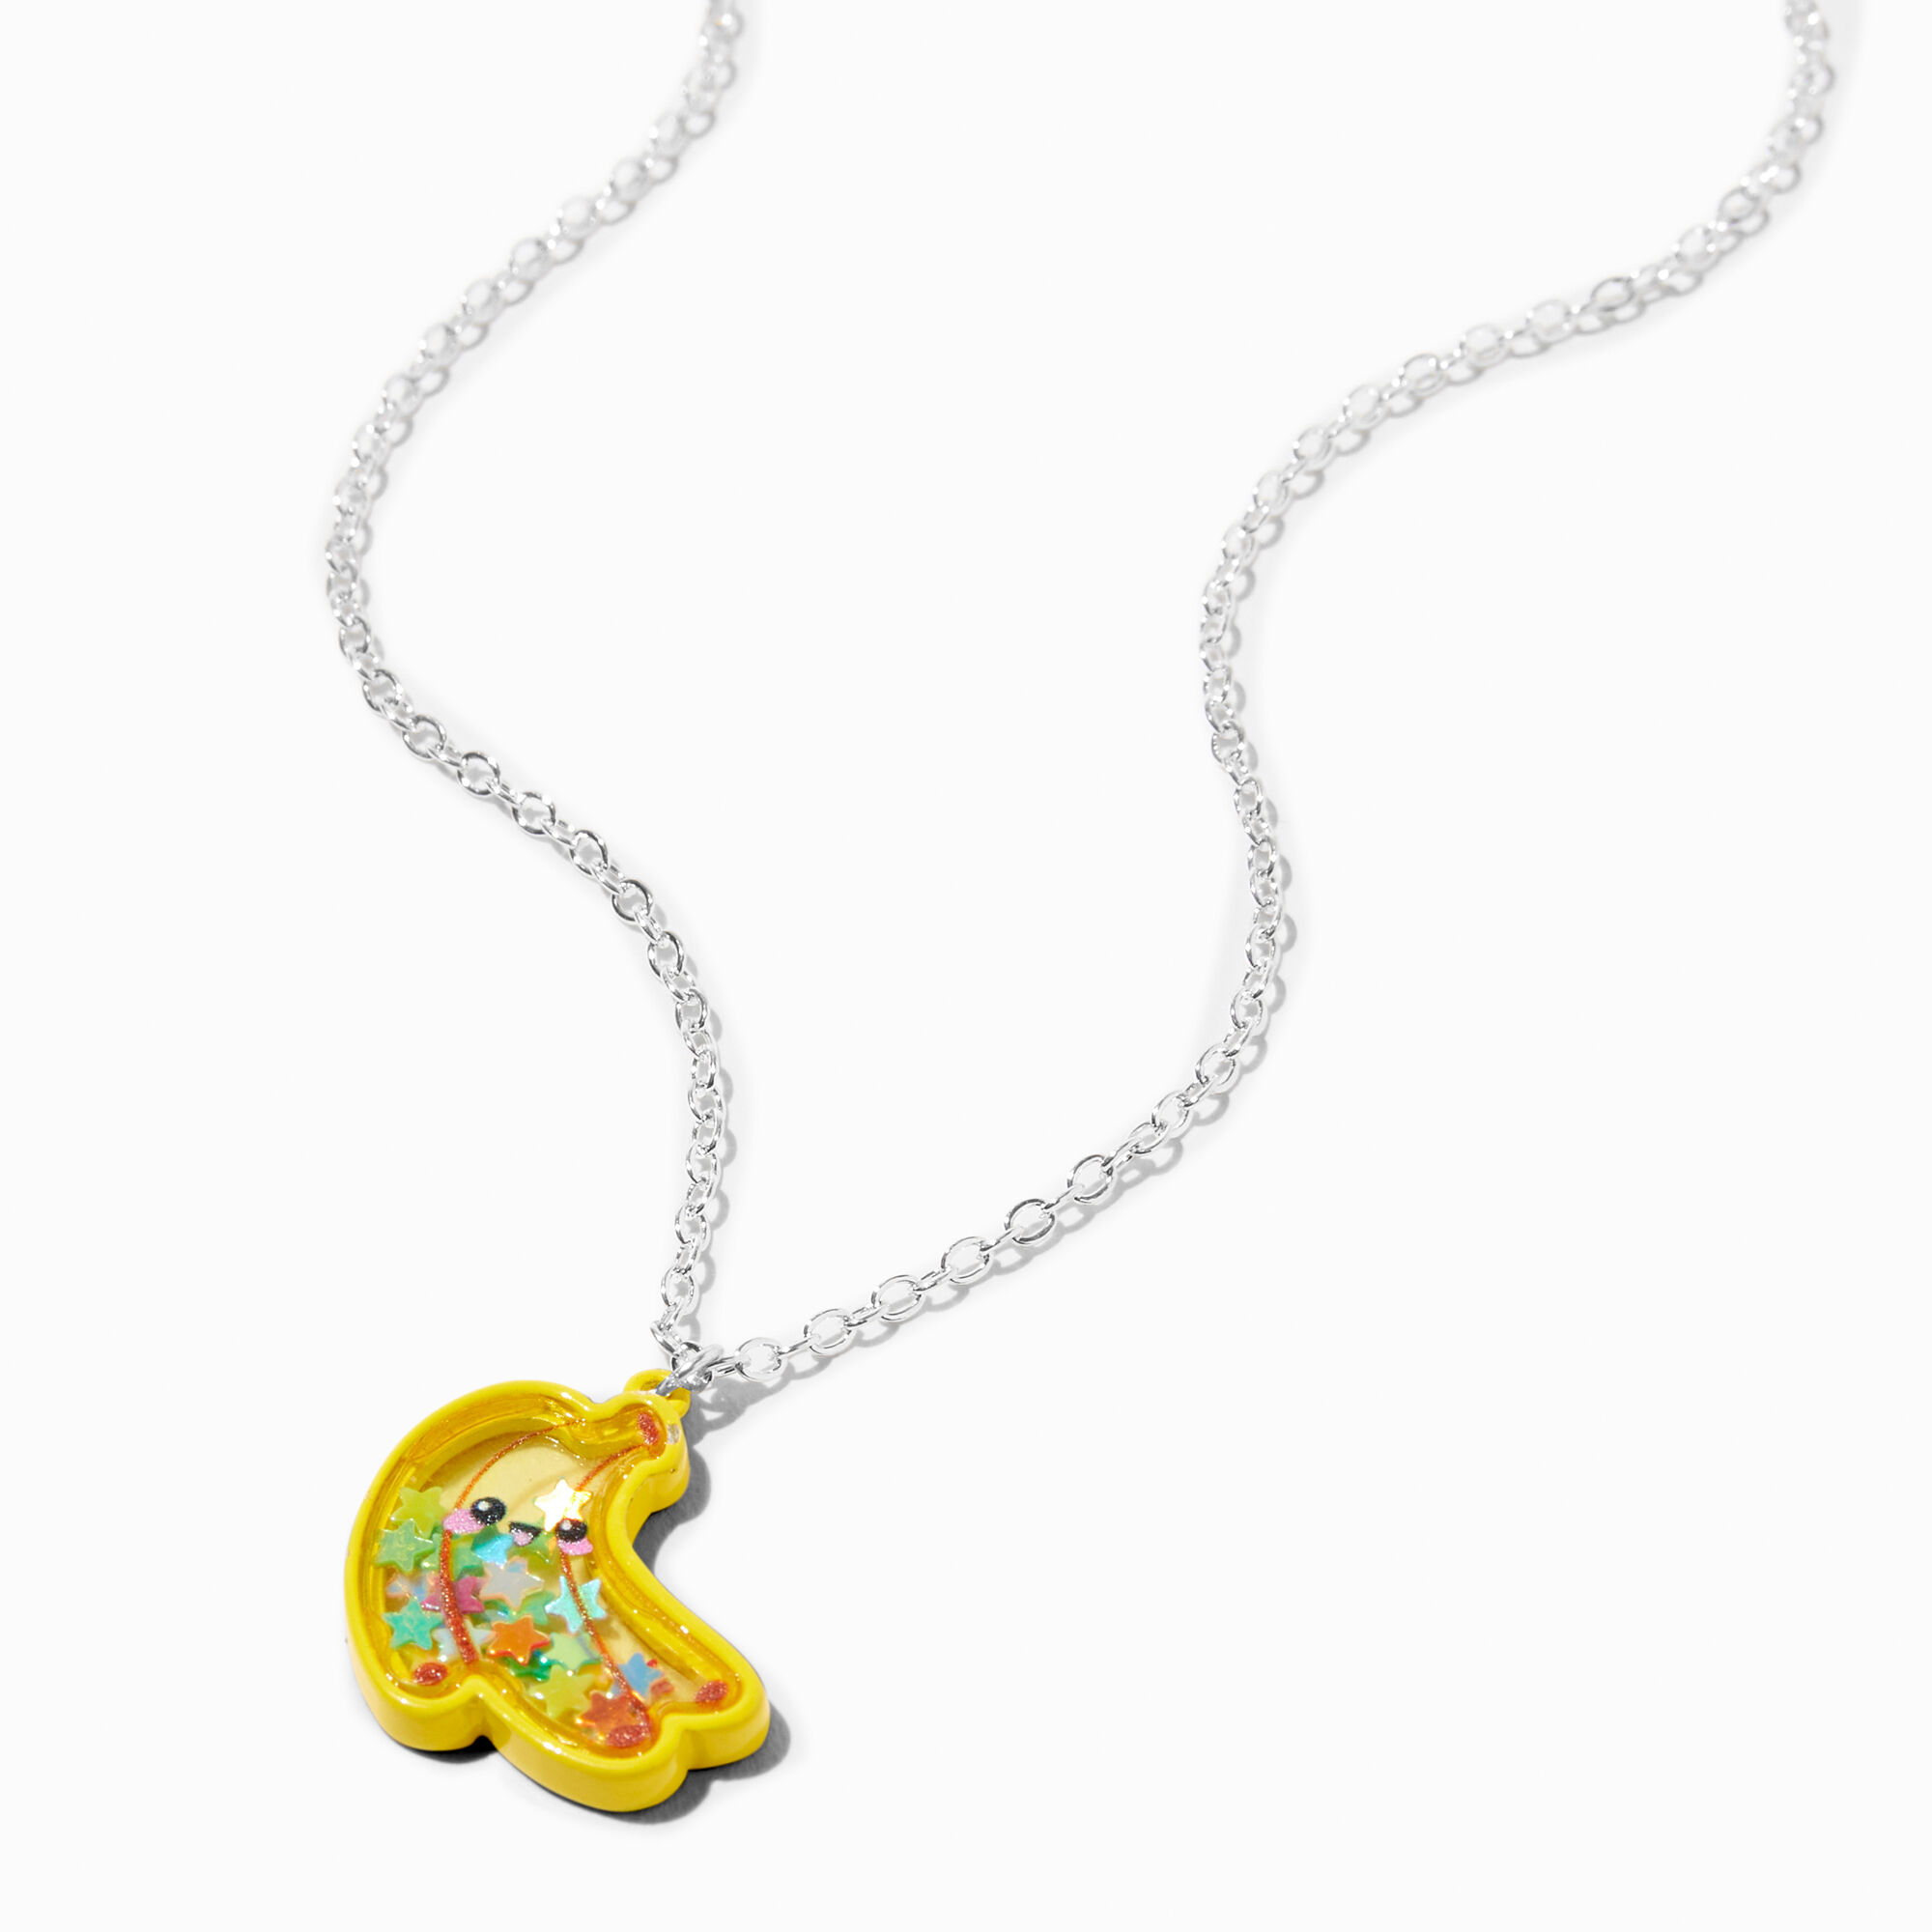 View Claires Banana Shaker Pendant Necklace Yellow information